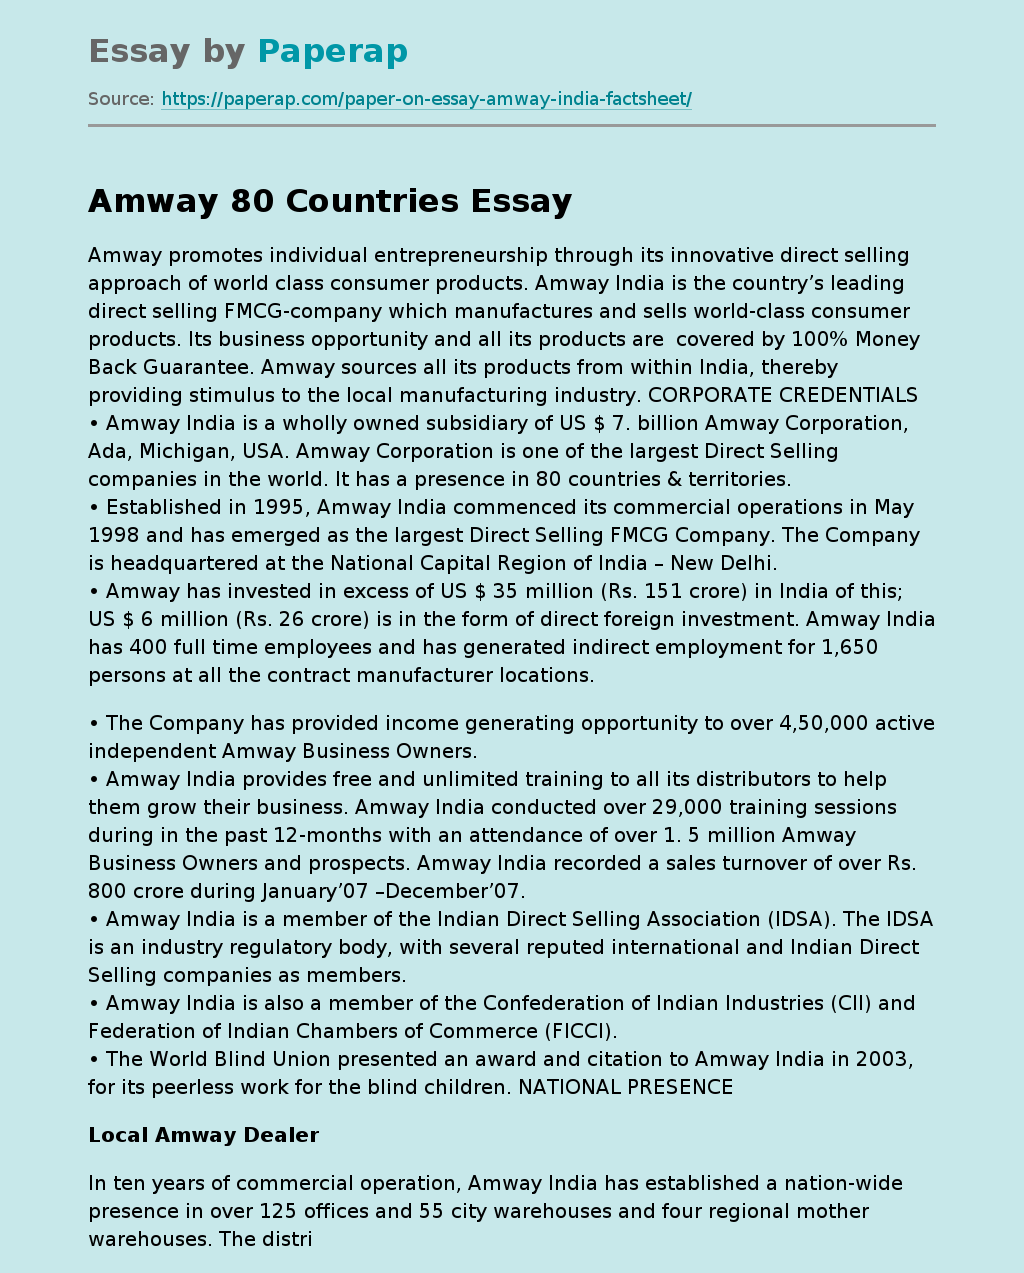 Amway 80 Countries